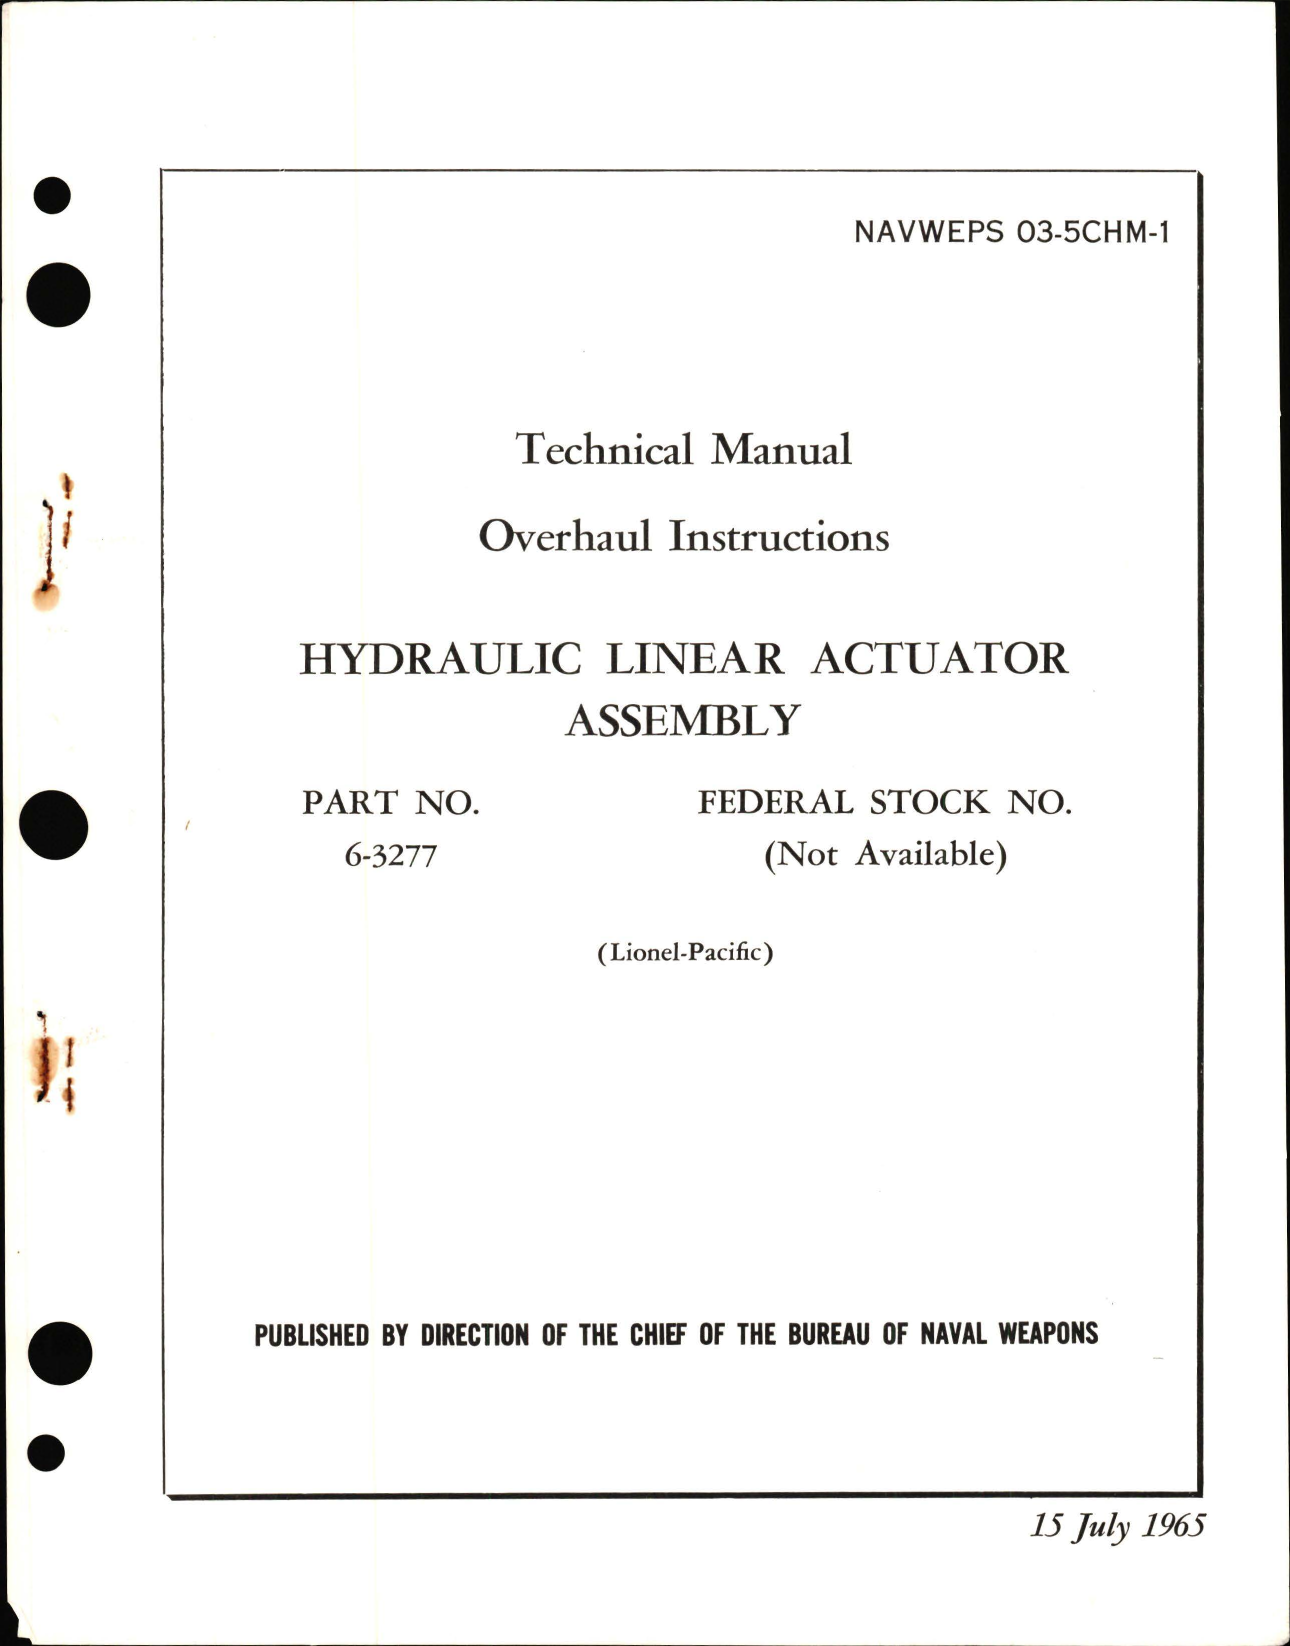 Sample page 1 from AirCorps Library document: Overhaul Instructions for Hydraulic Linear Actuator Assembly 6-3277